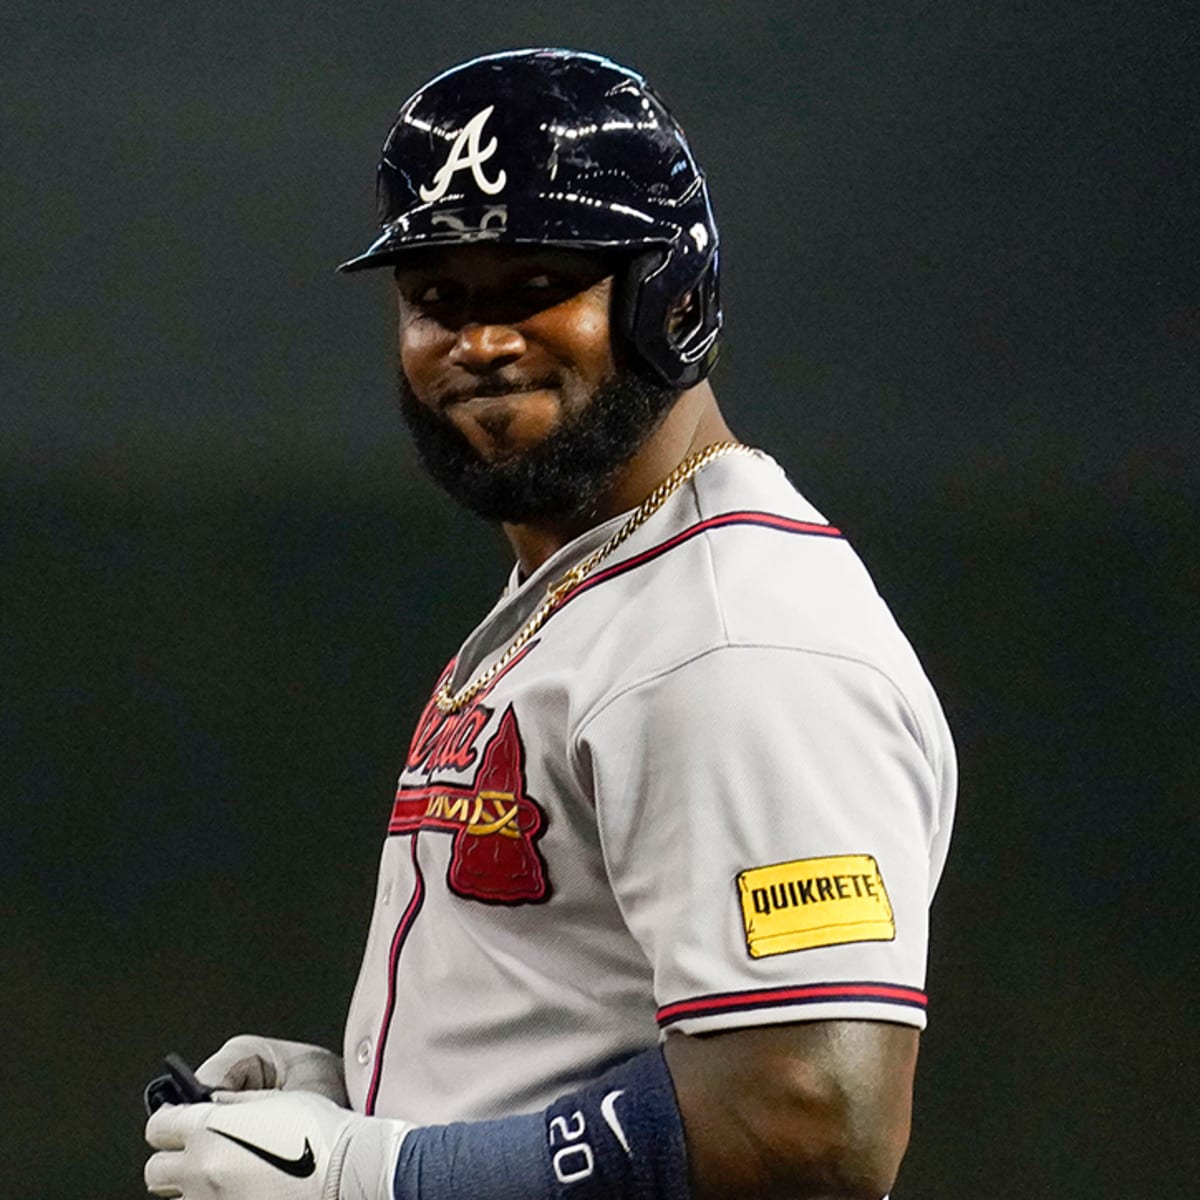 Braves' Marcell Ozuna Benched for Loafing After Hitting 415-Foot